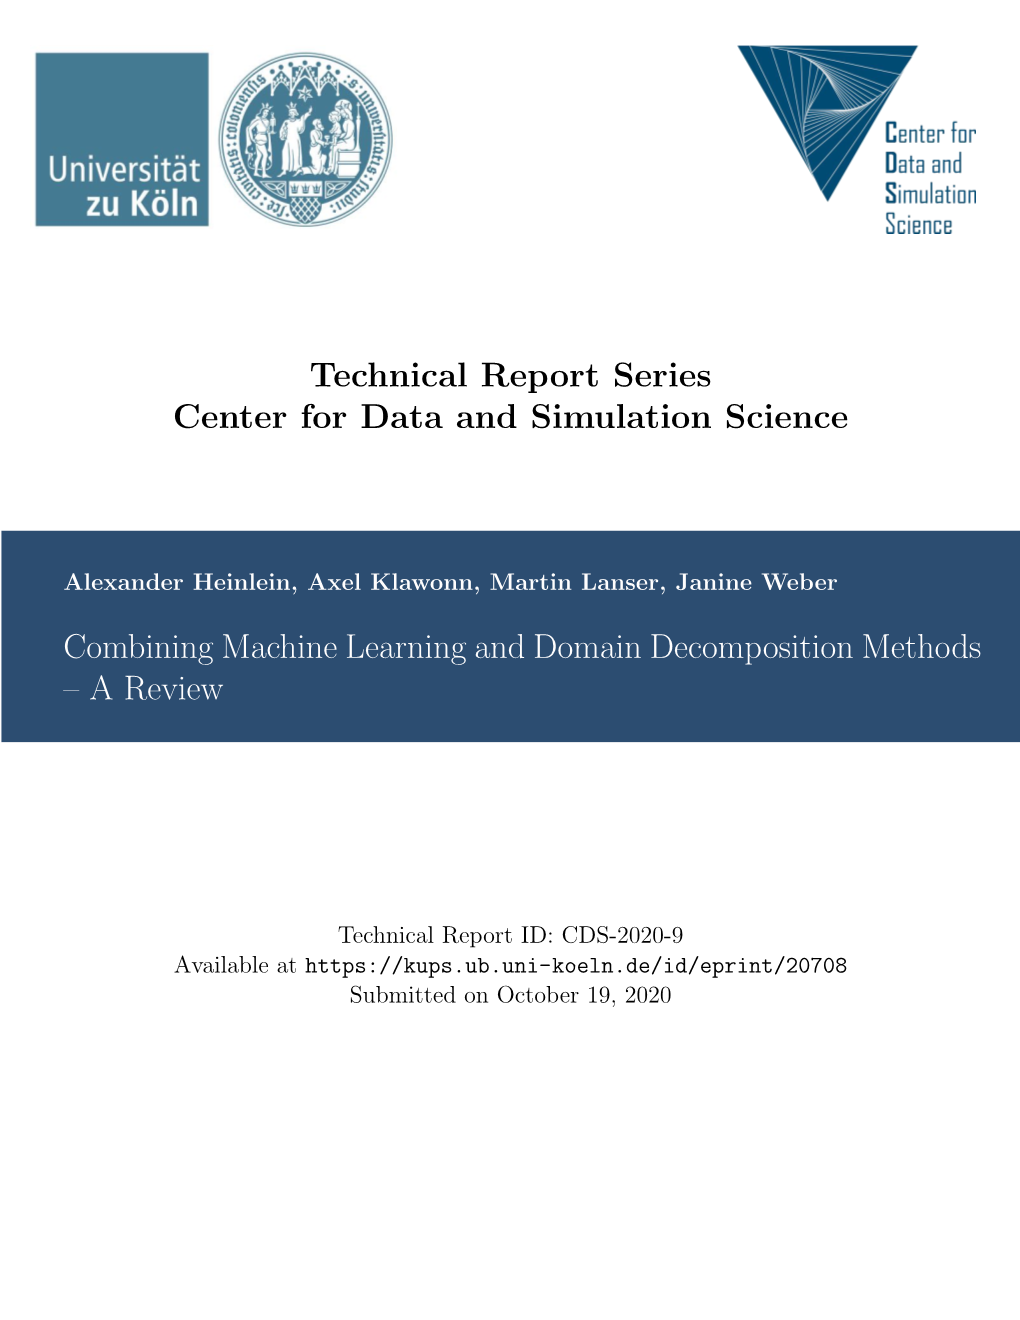 Technical Report Series Center for Data and Simulation Science